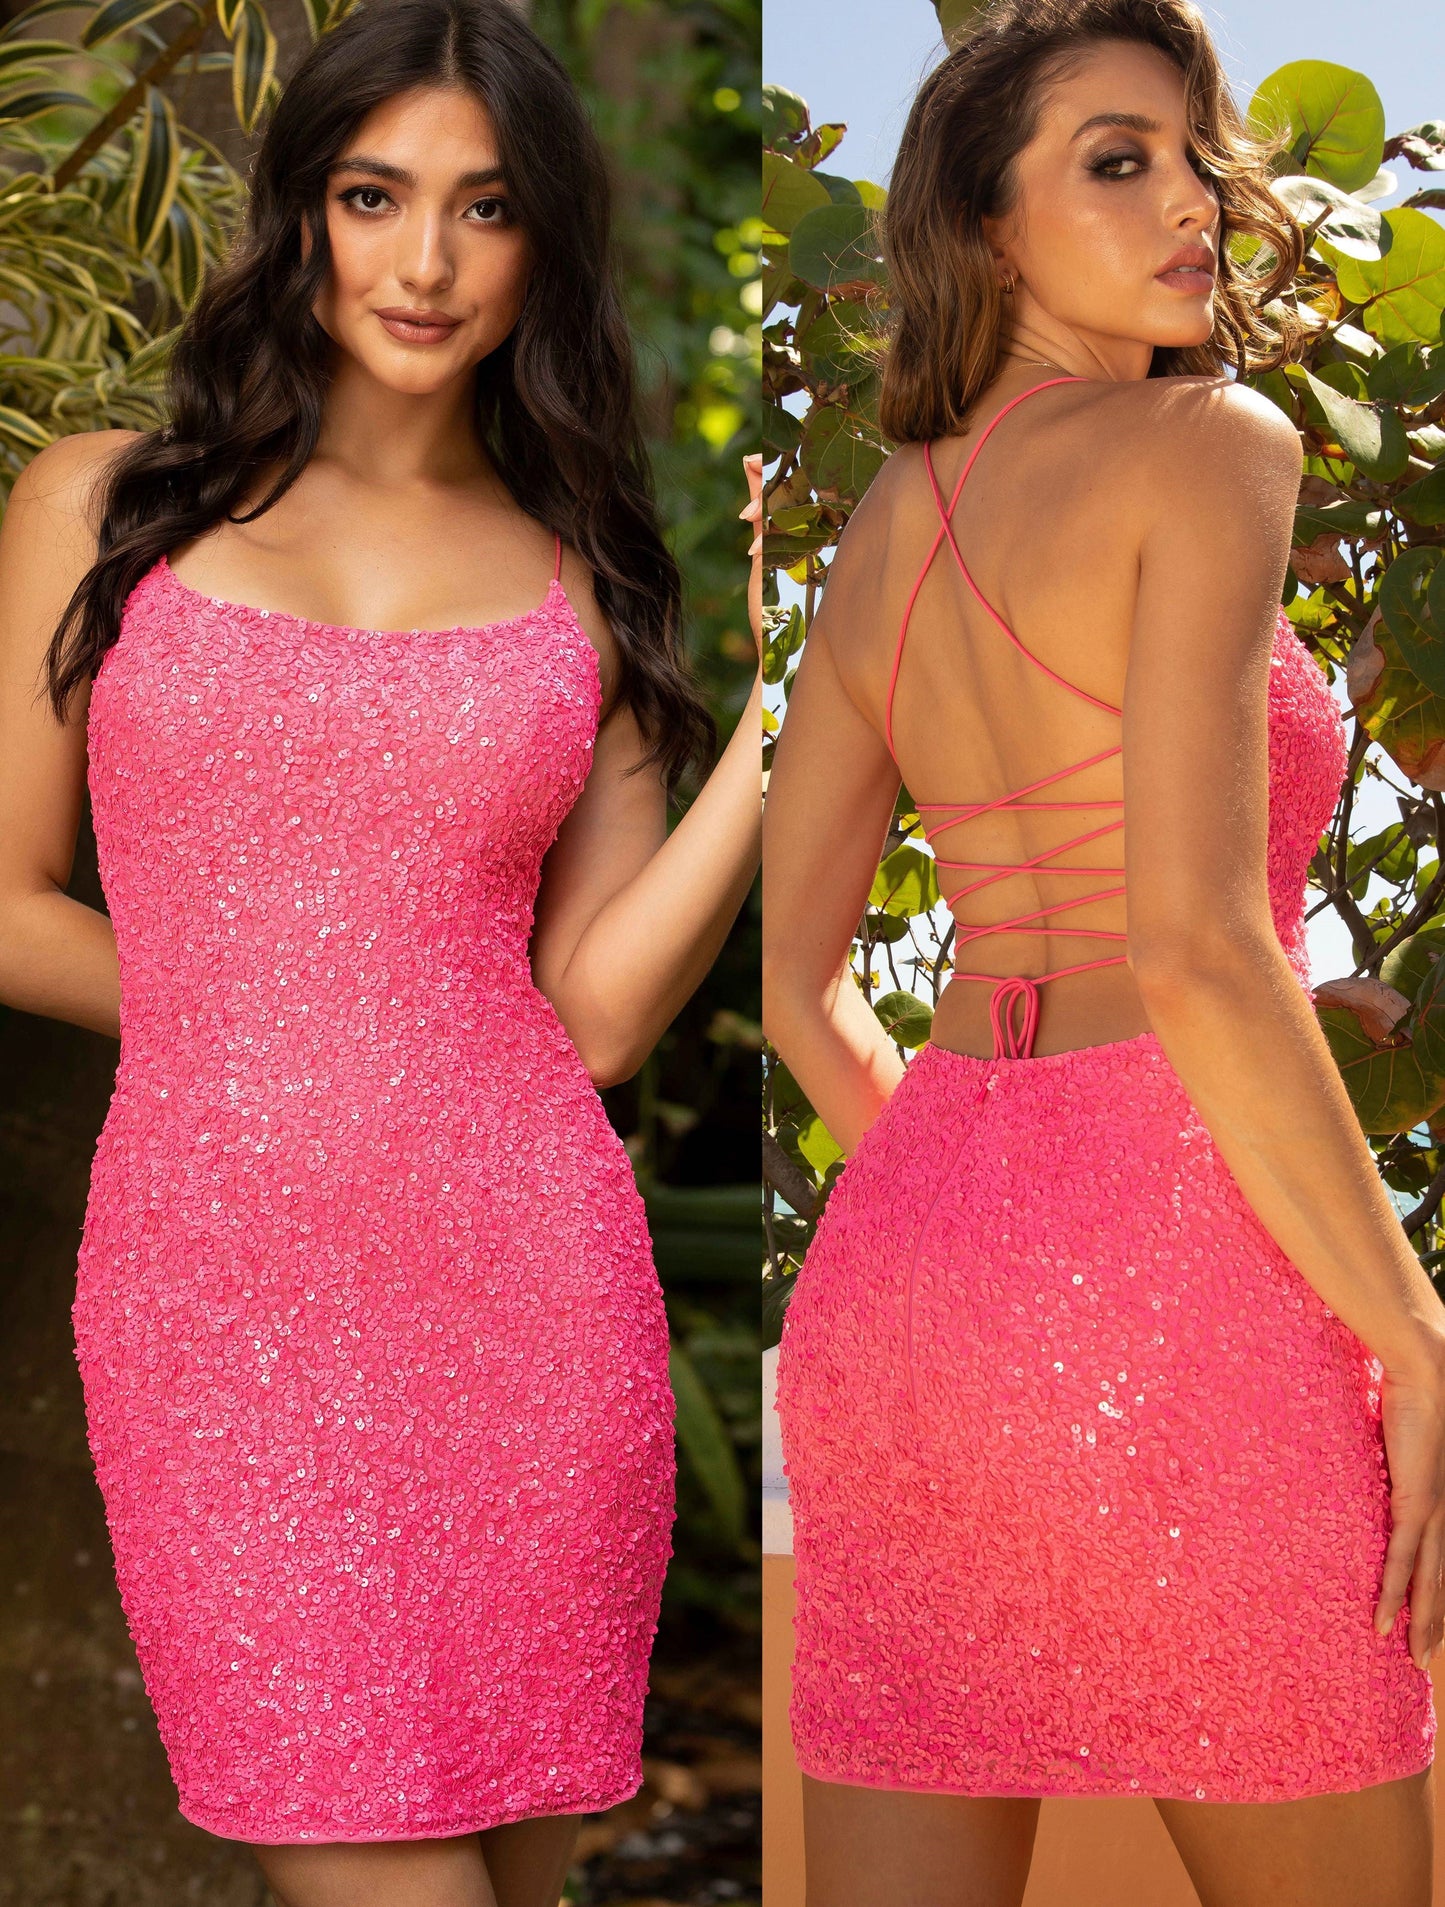 Primavera 3351 is a short fitted sequin embellished cocktail dress. This gown would be perfect for homecoming, dances & Formal events. Scoop neckline with spaghetti straps wrapping around to an open back with a lace up corset tie. This backless dress features multi & Textured sequins for Tons of Dimension!Available Color: Baby Pink, Black, Blue, Bright Blue, Emerald, Fuchsia, Gold, Ivory, Midnight, Neon Coral, Neon Lilac, Neon Pink, Neon Sage, Orange, Purple, Red, Rose, Turquoise, Yellow